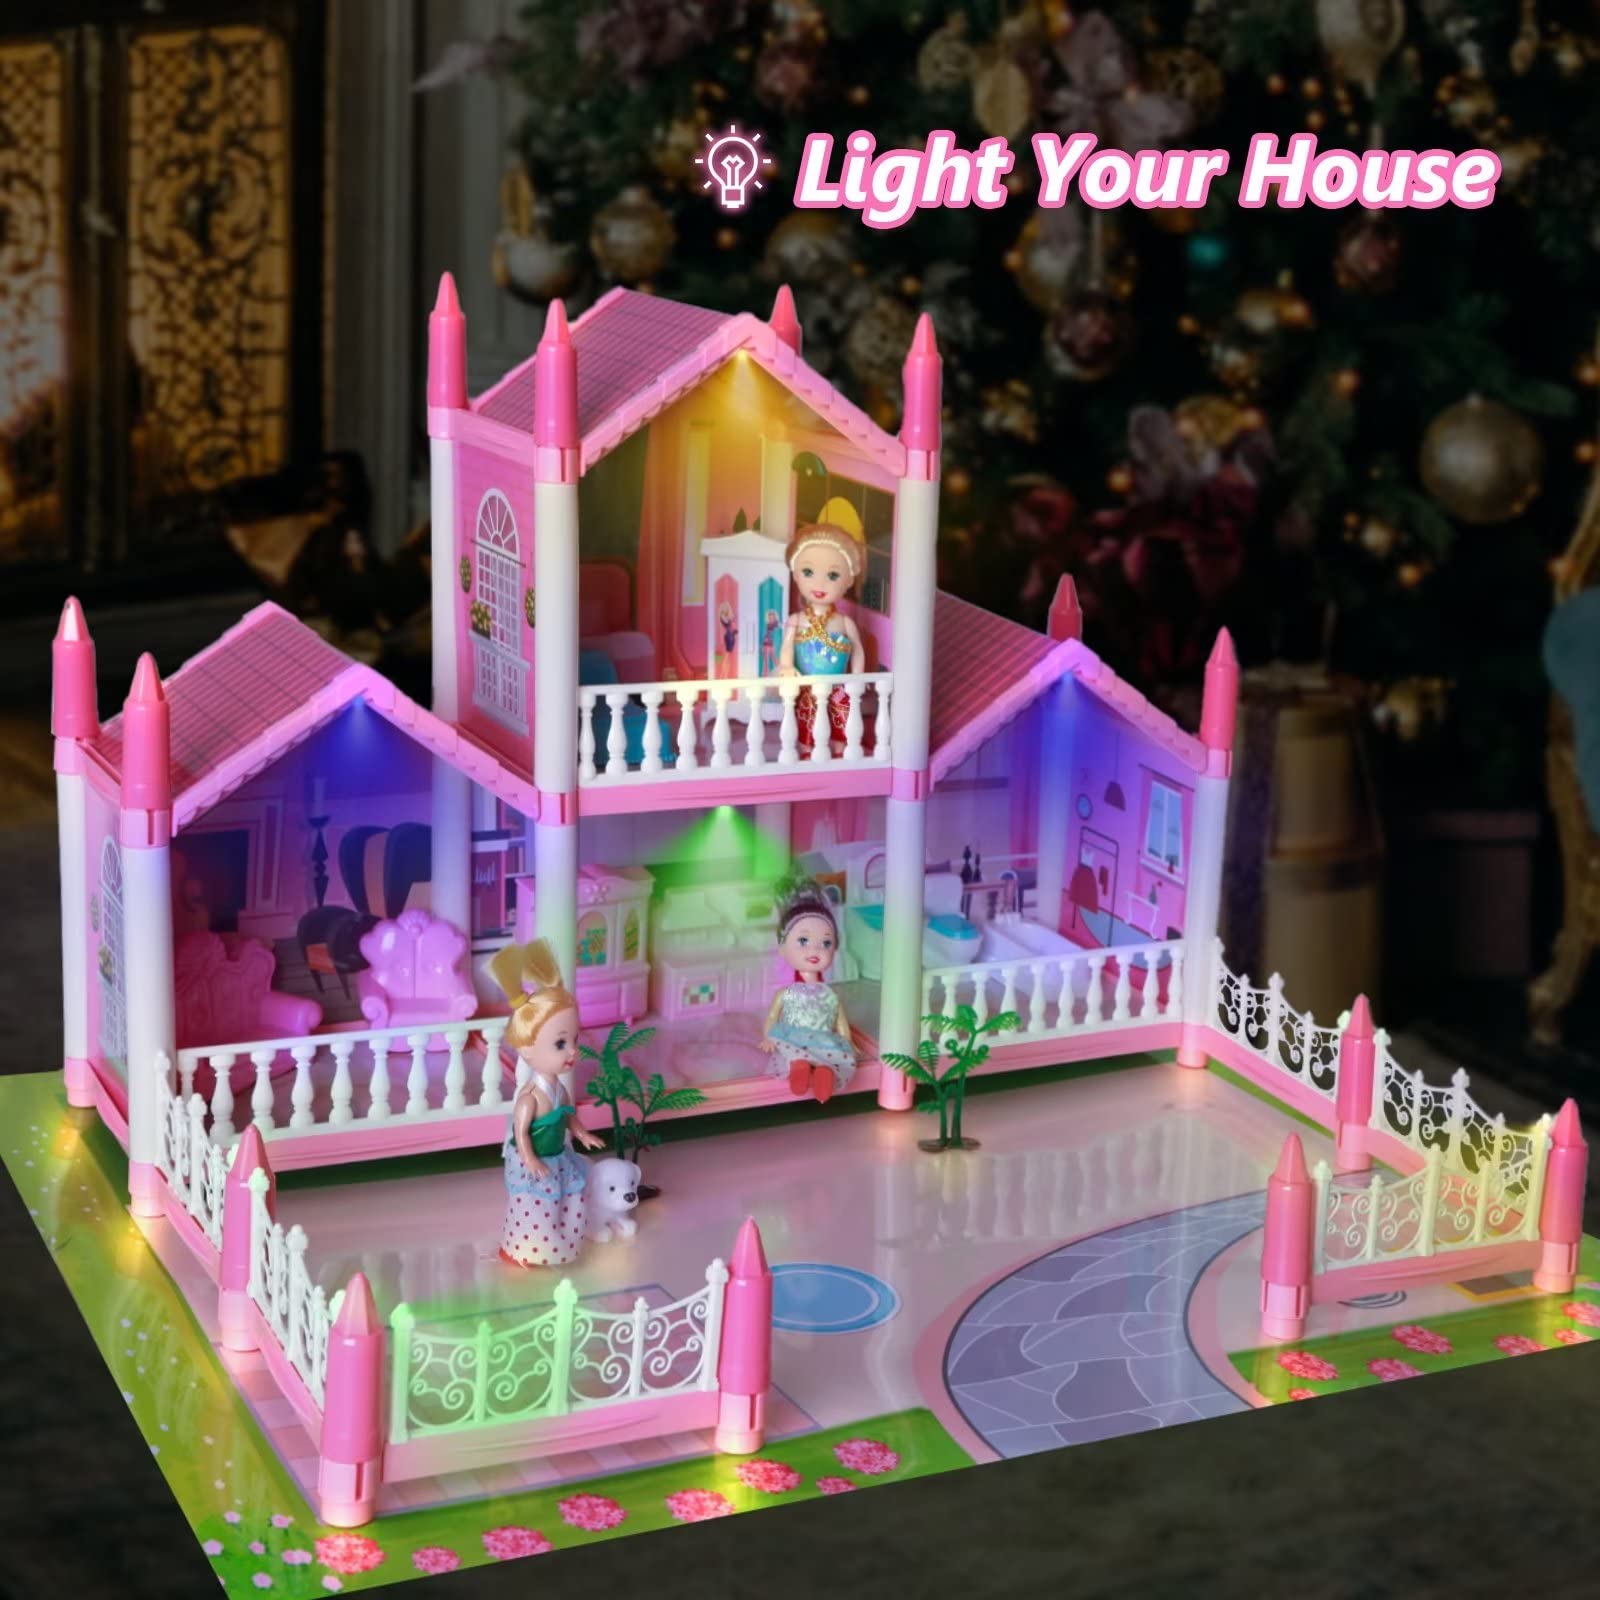 Dollhouse Girls Toys - Dreamhouse Playhouse with Colorful Light, Yard, 3 Toy Figures, Furnitures & Scene Mat Pretend to Play Princess Toys House, Ideal for 3 4 5 6 7 8+ Year Old Girl